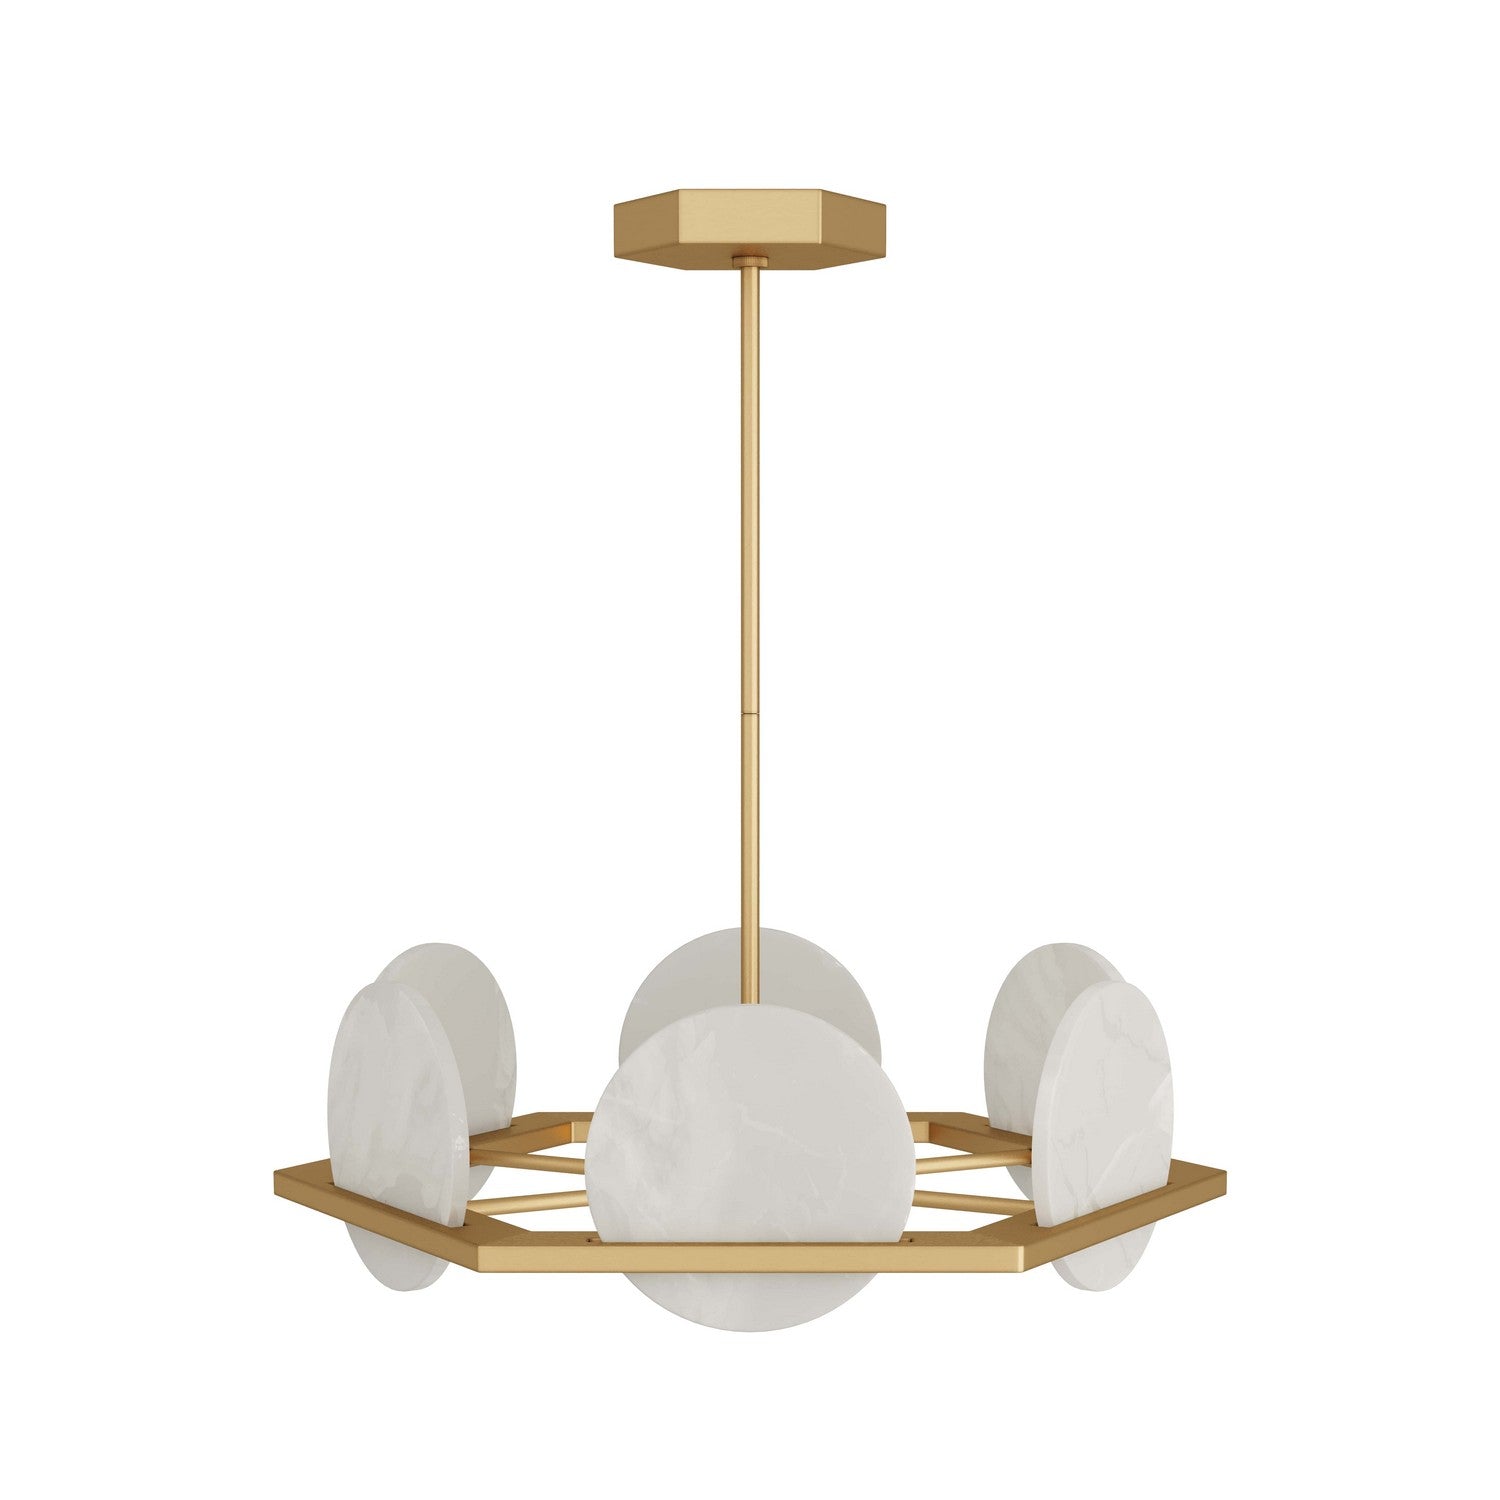 LED Chandelier from the Savion collection in White finish